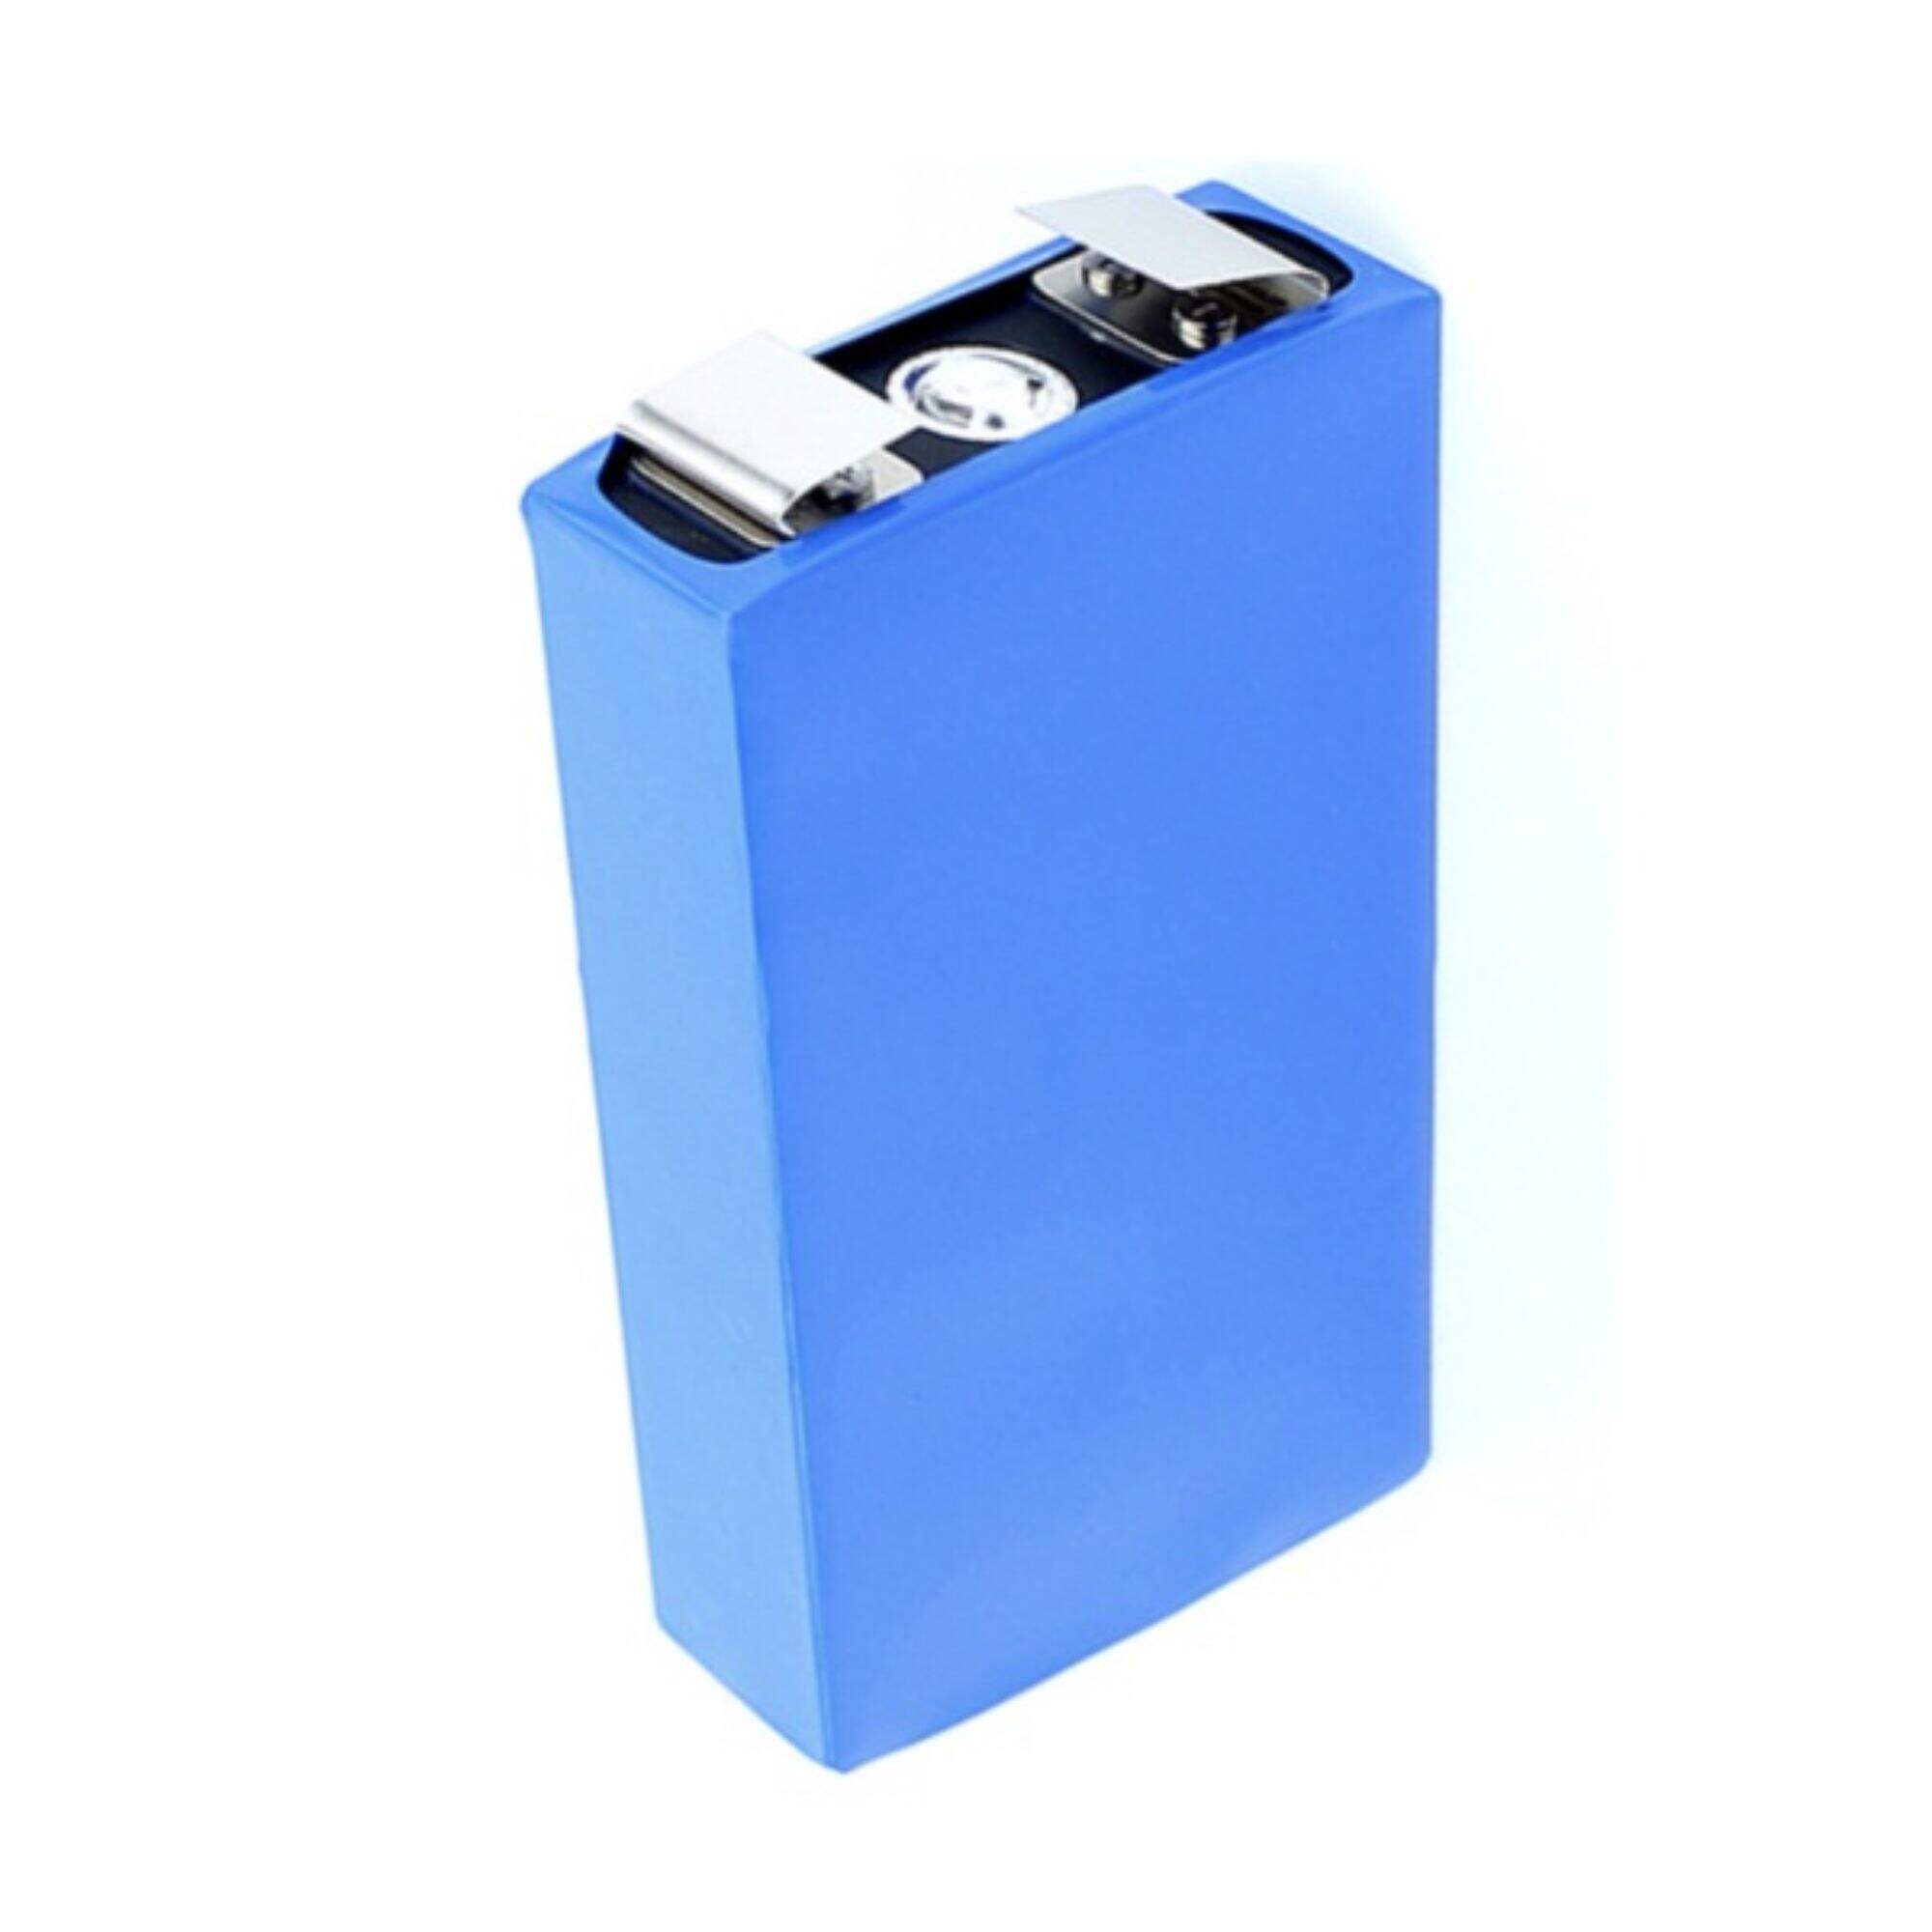 3.2V 20Ah Lithium iron Phosphate LiFePO4 Prismatic Battery Cell